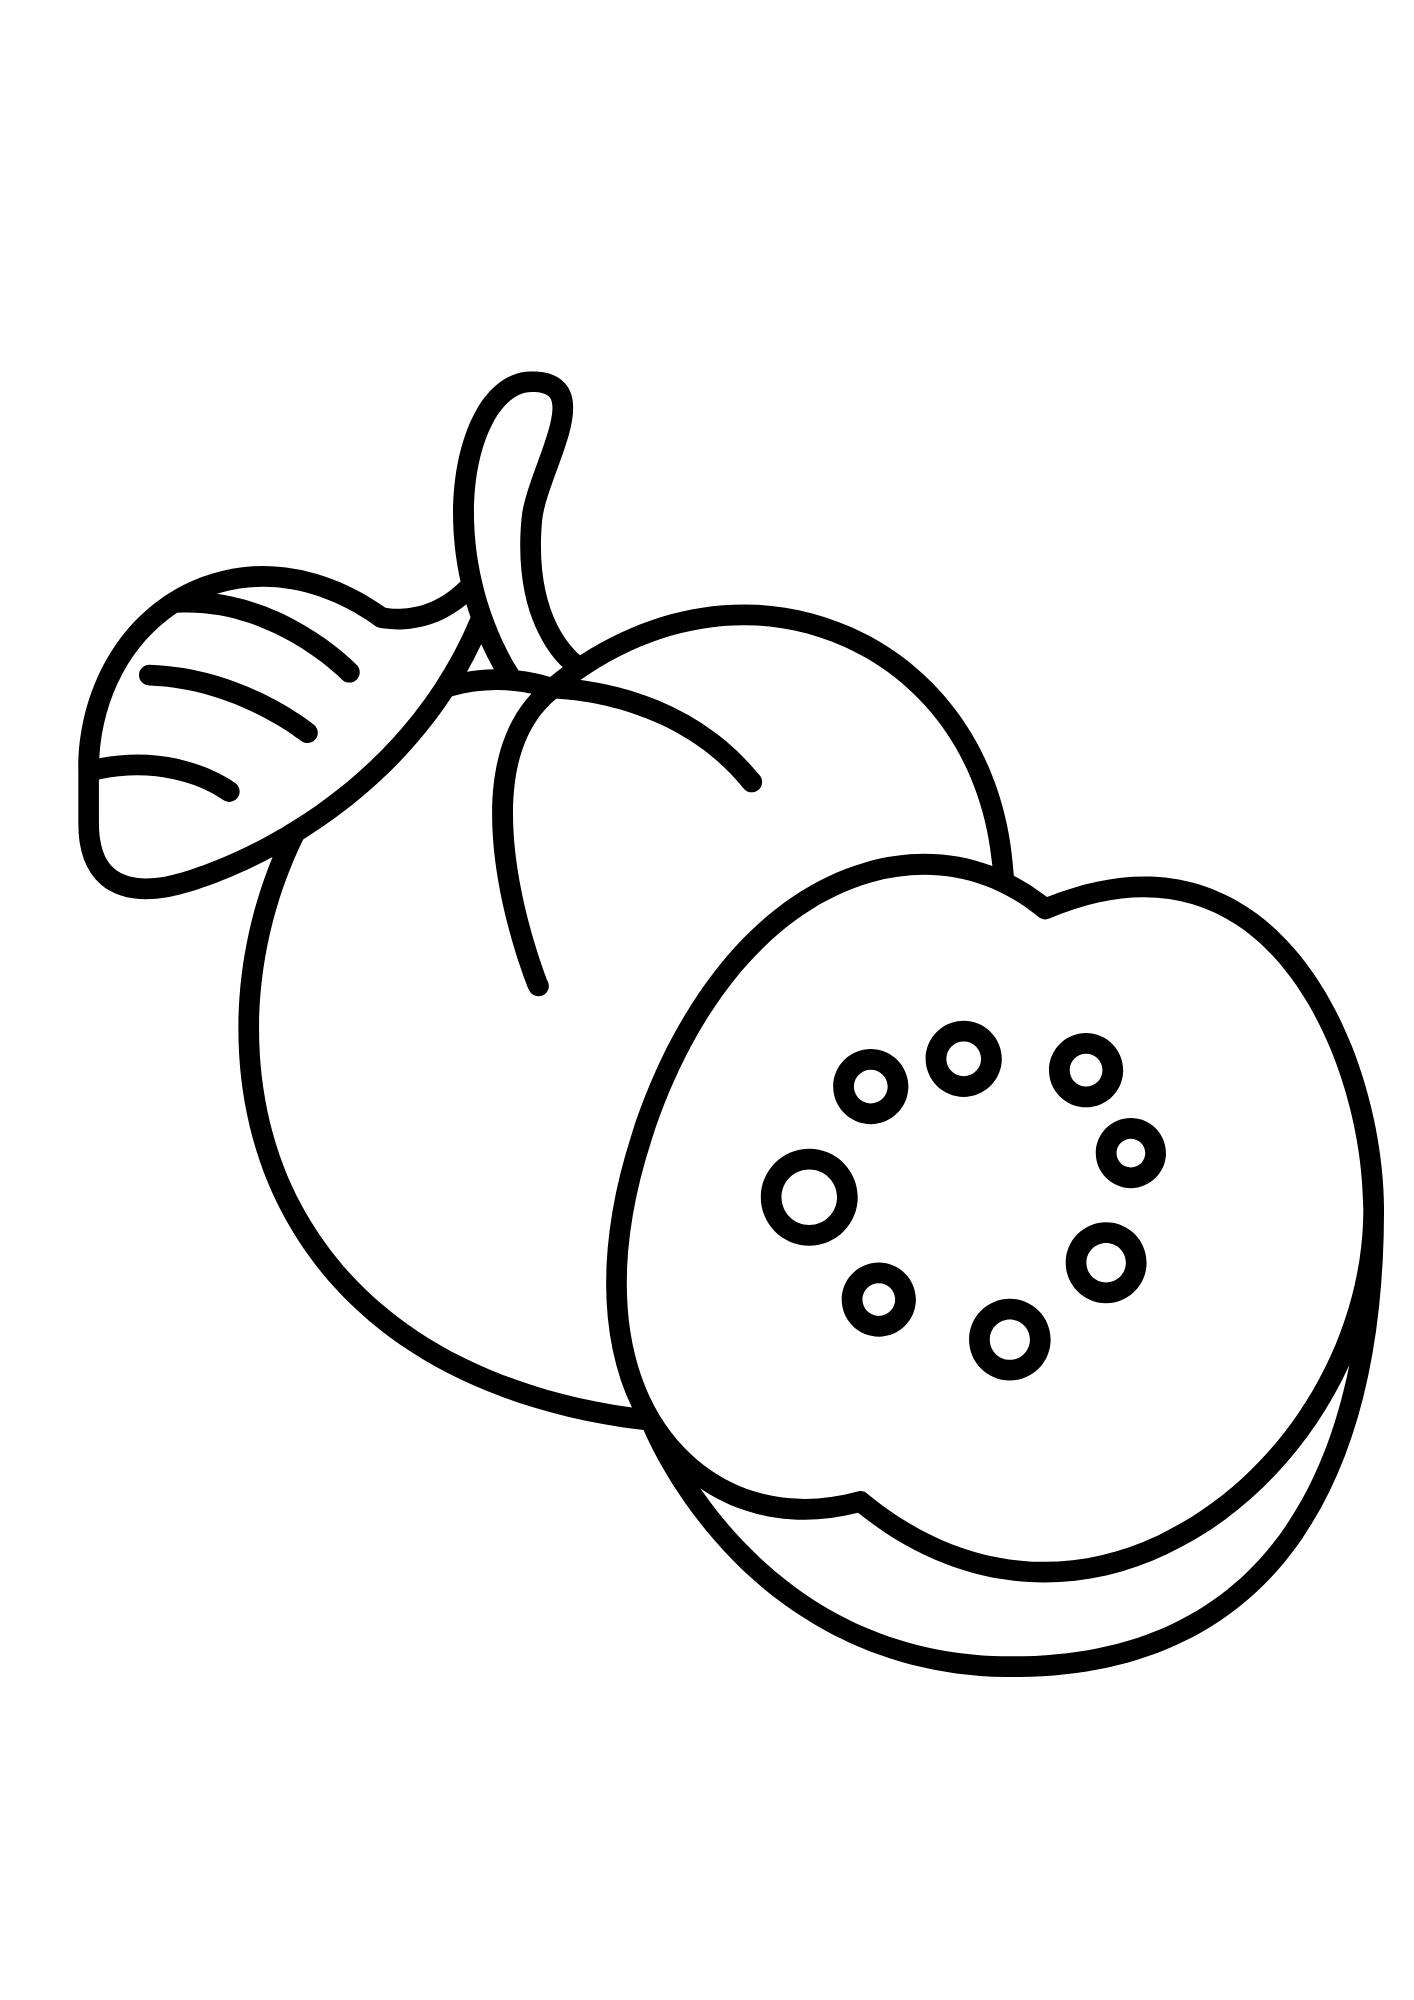 Guavas For Children Coloring Pages